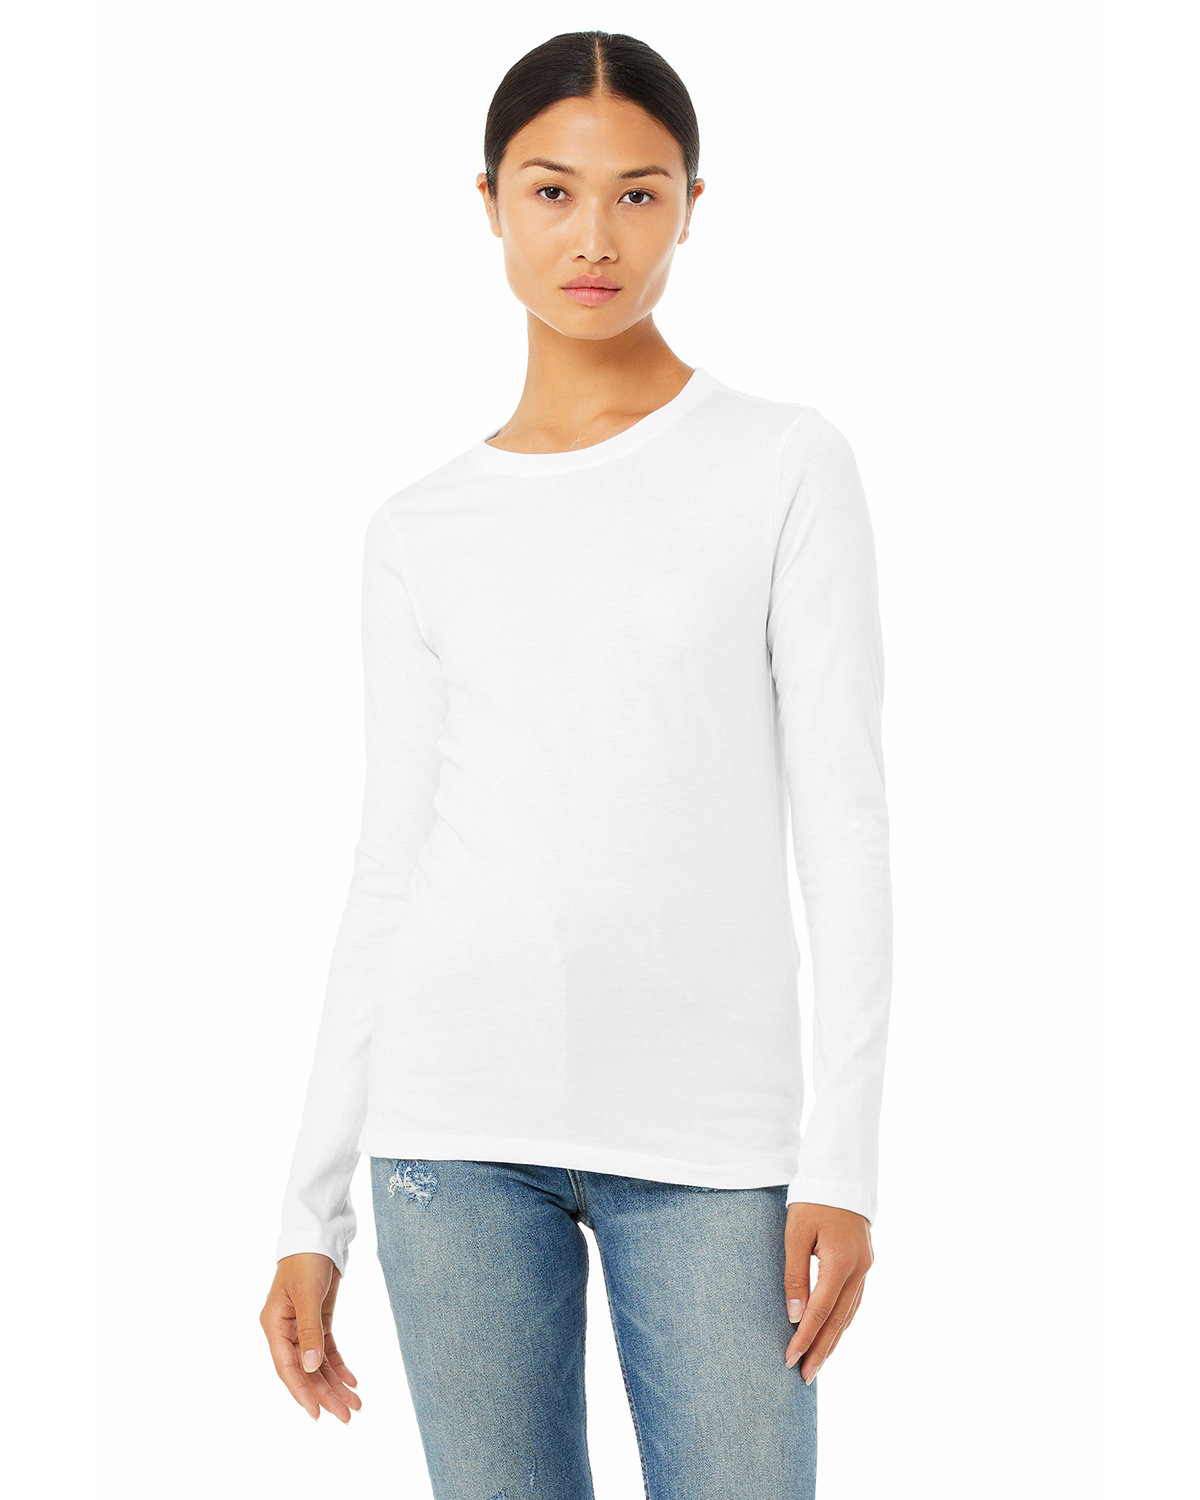 Bella + Canvas Ladies' Relaxed Jersey Long-Sleeve T-Shirt WHITE 